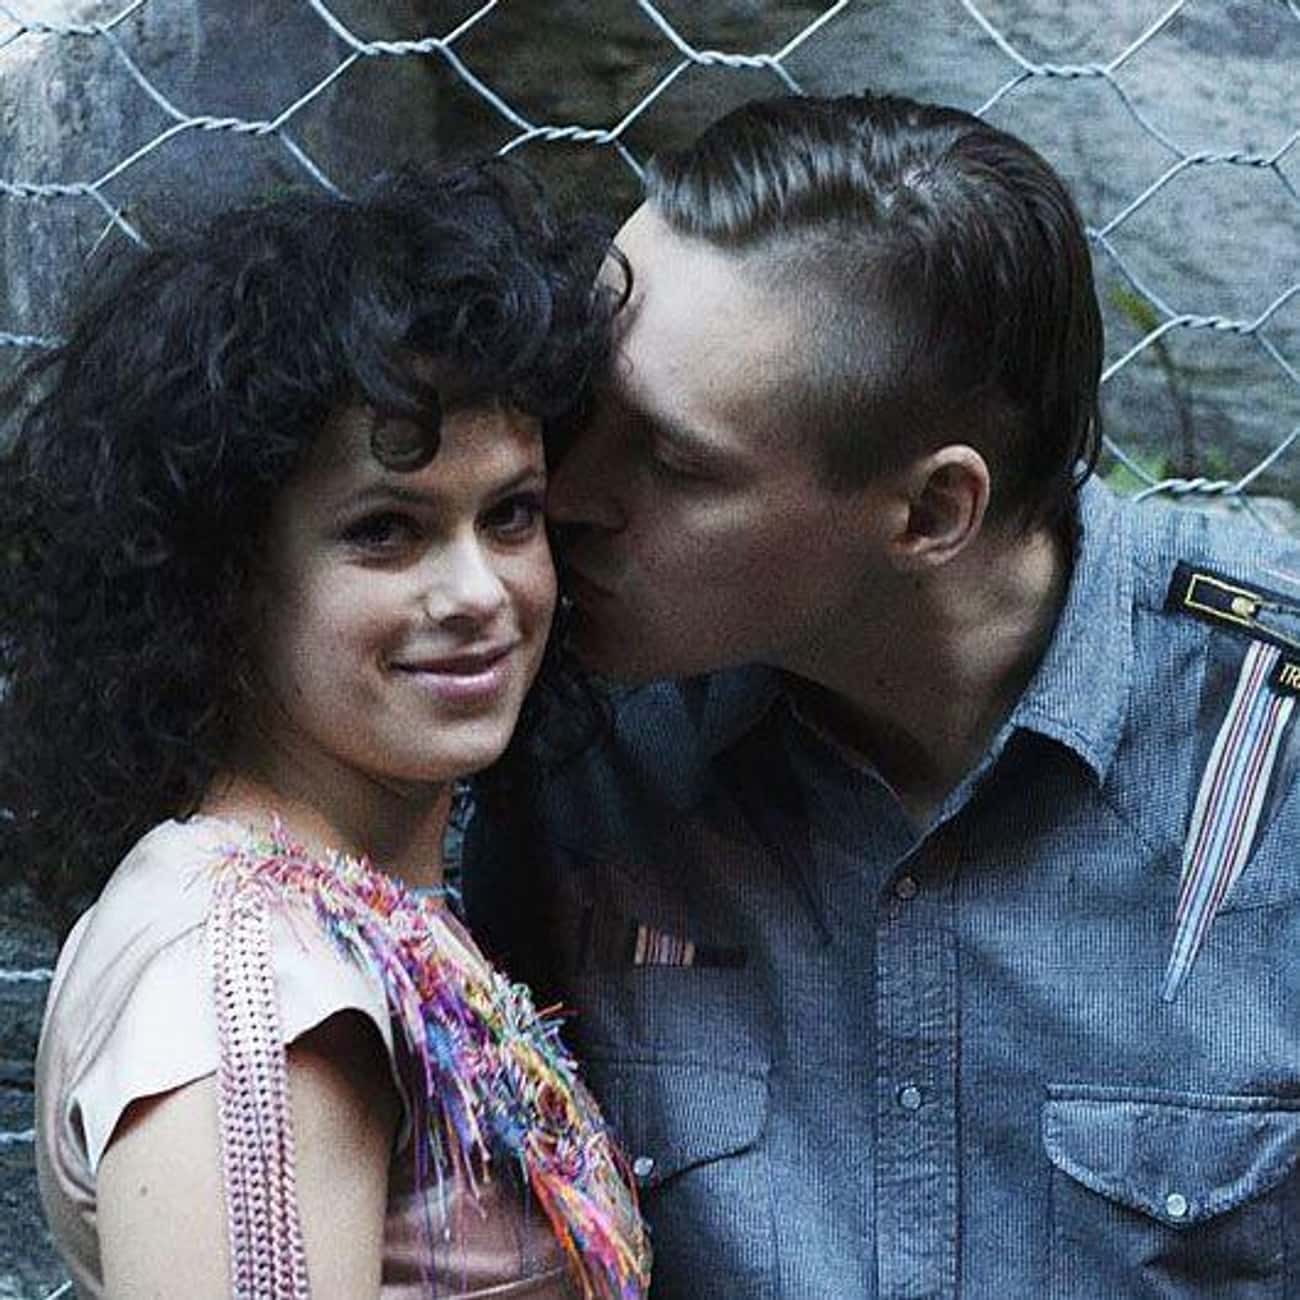 Win Butler and Régine Chassagne